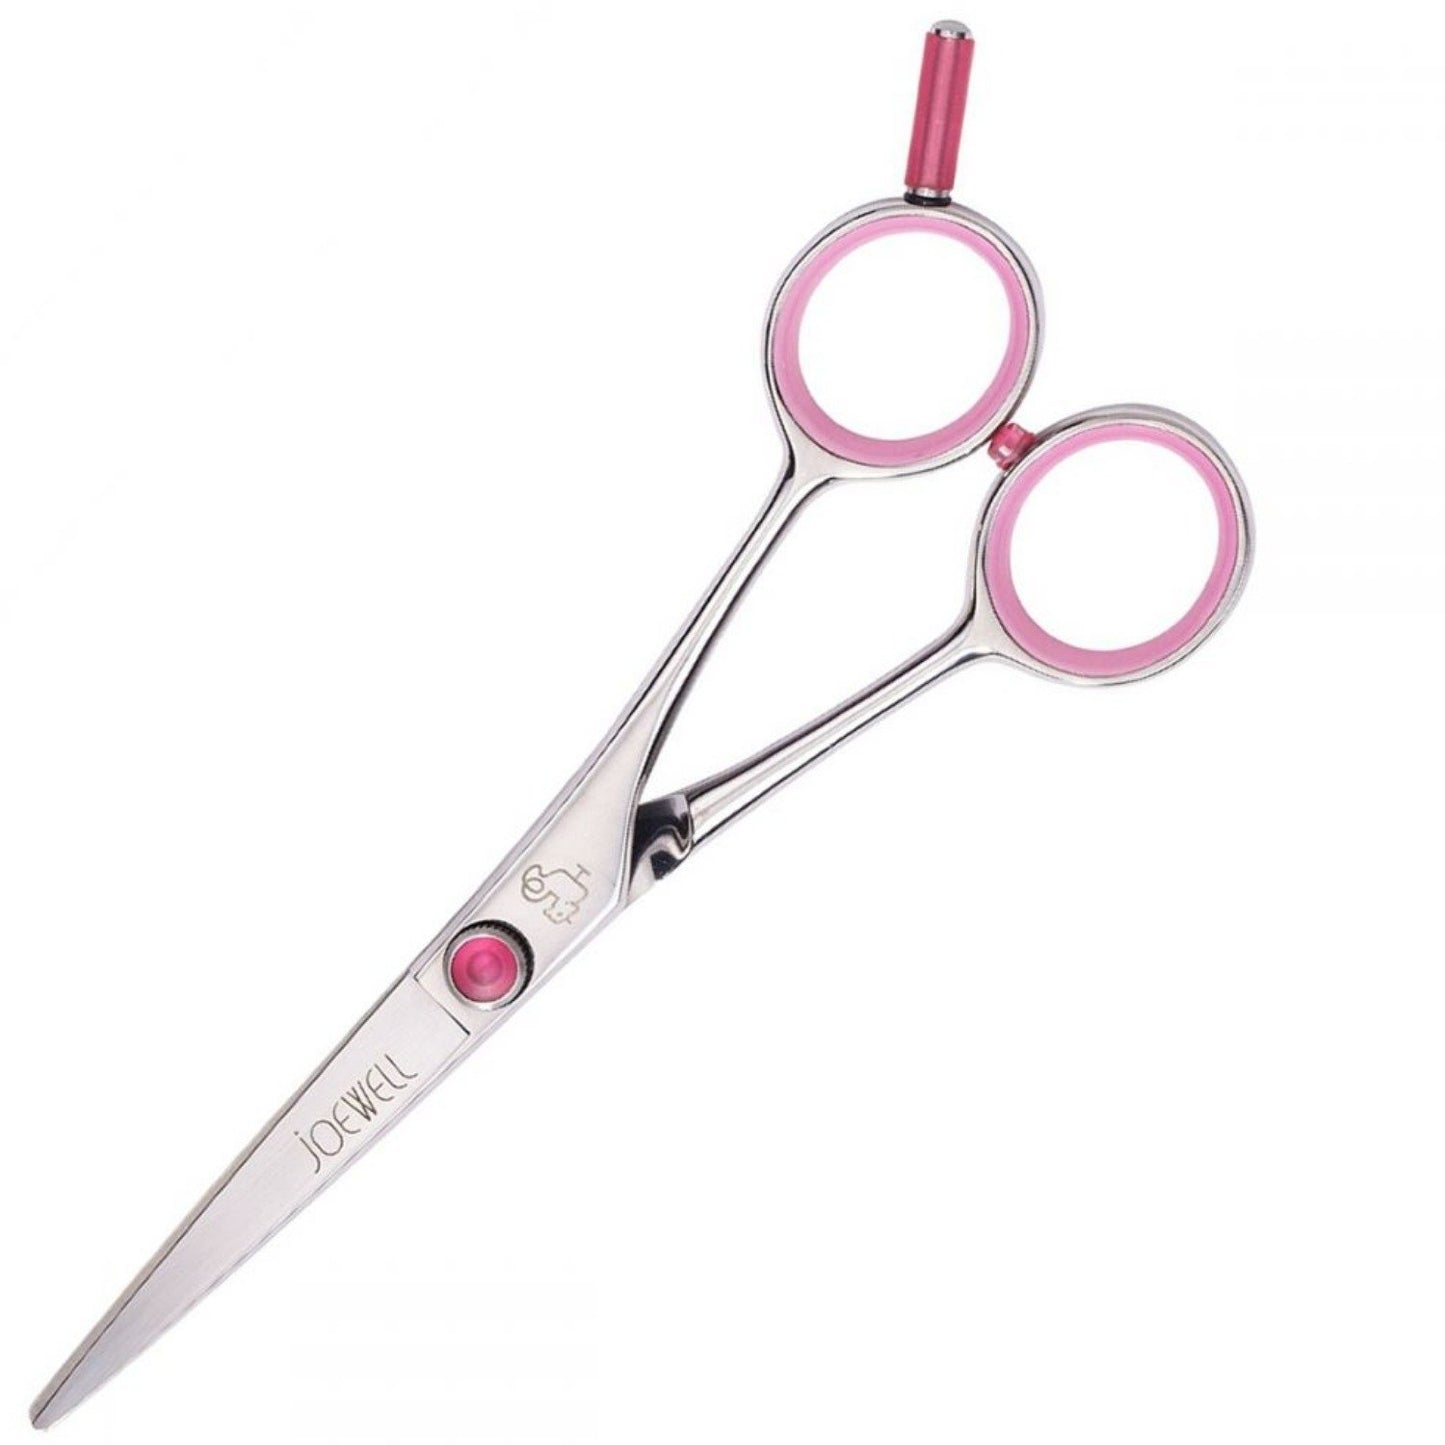 Joewell Classic Pink Hairdressing Scissors 5.5 Inch (SHOP)